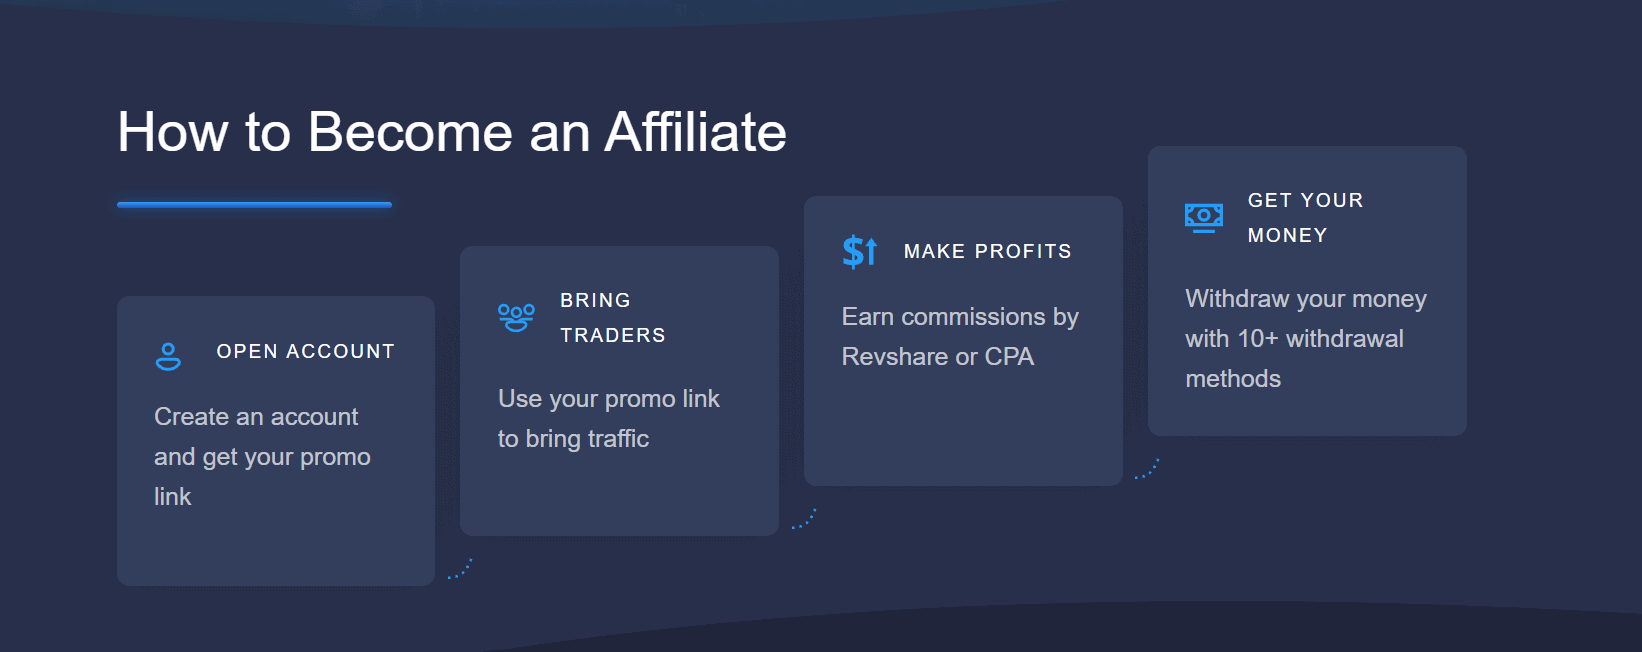 How to Become an Affiliate